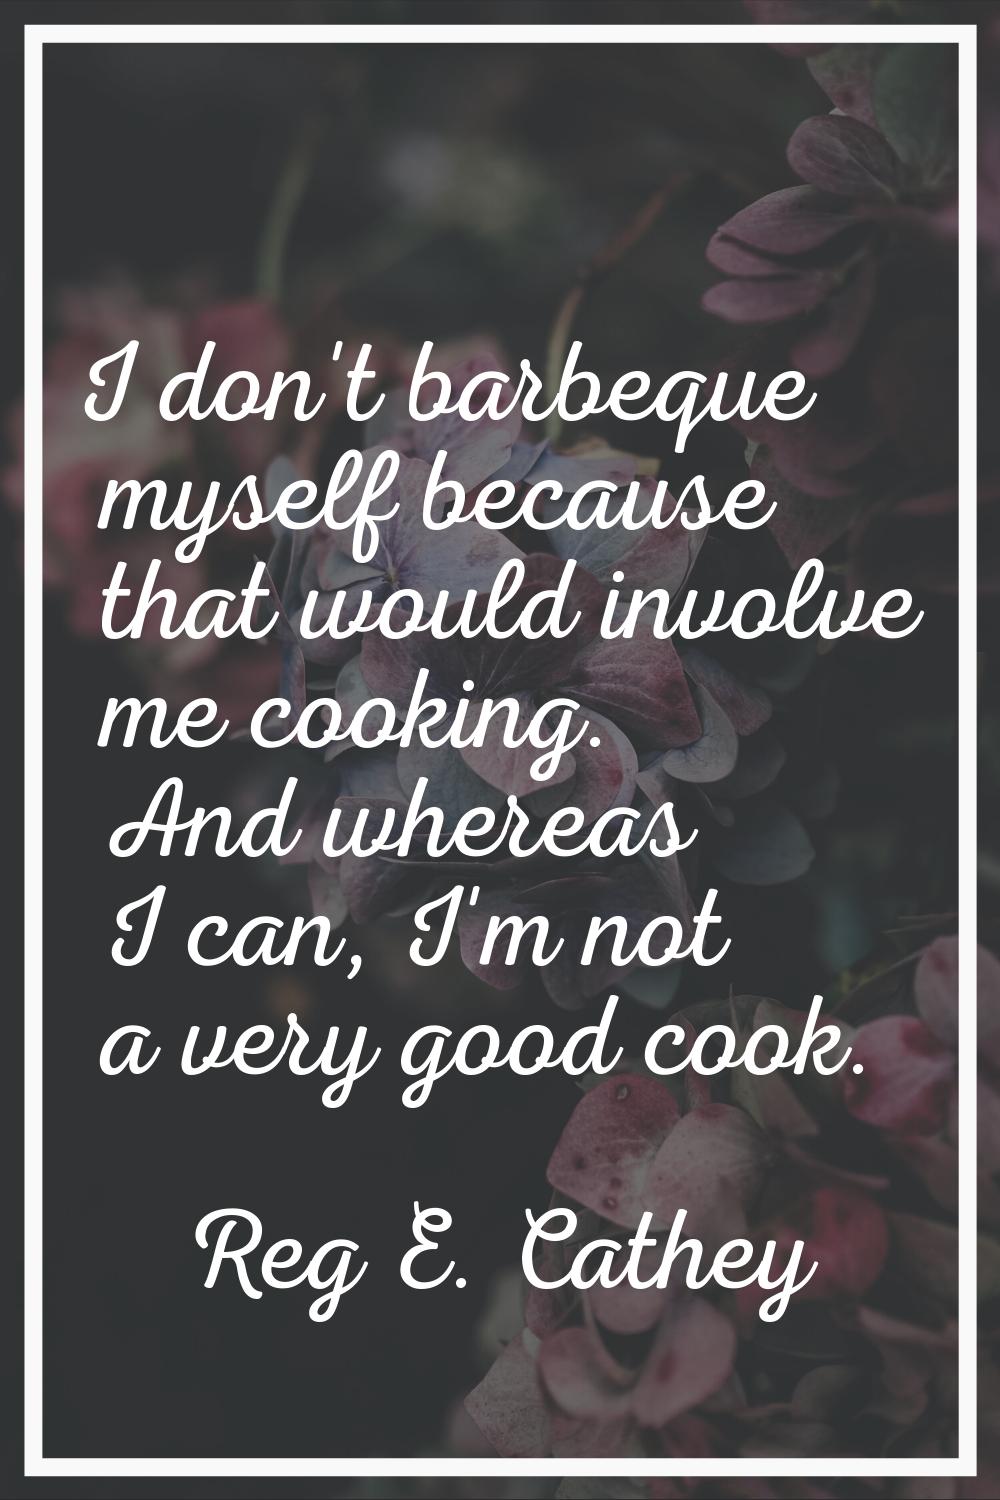 I don't barbeque myself because that would involve me cooking. And whereas I can, I'm not a very go